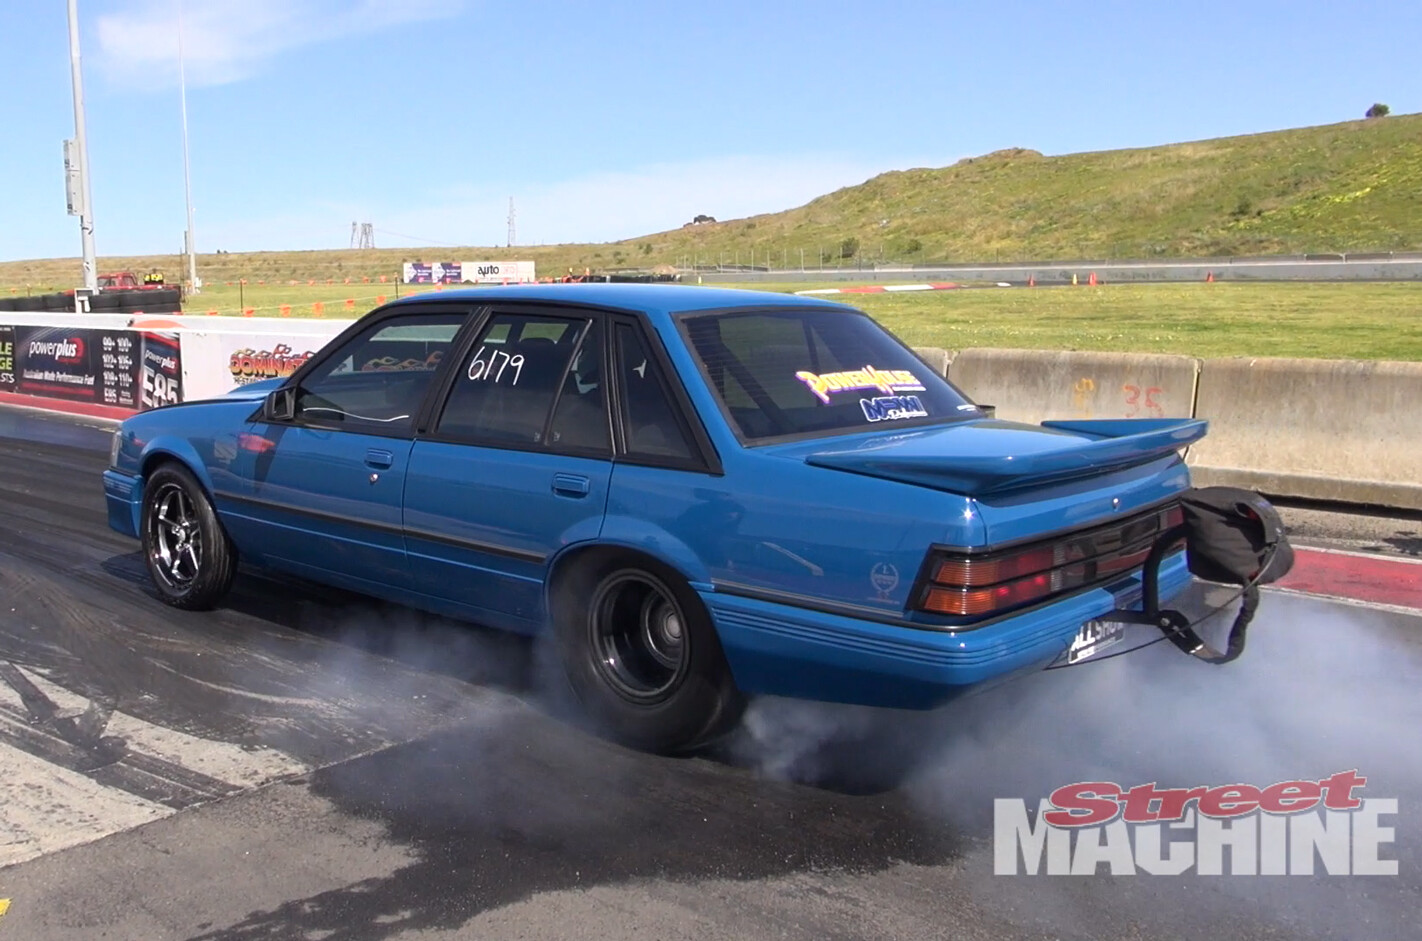 CALDER PARK TEST-AND-TUNE HIGHLIGHTS – VIDEO